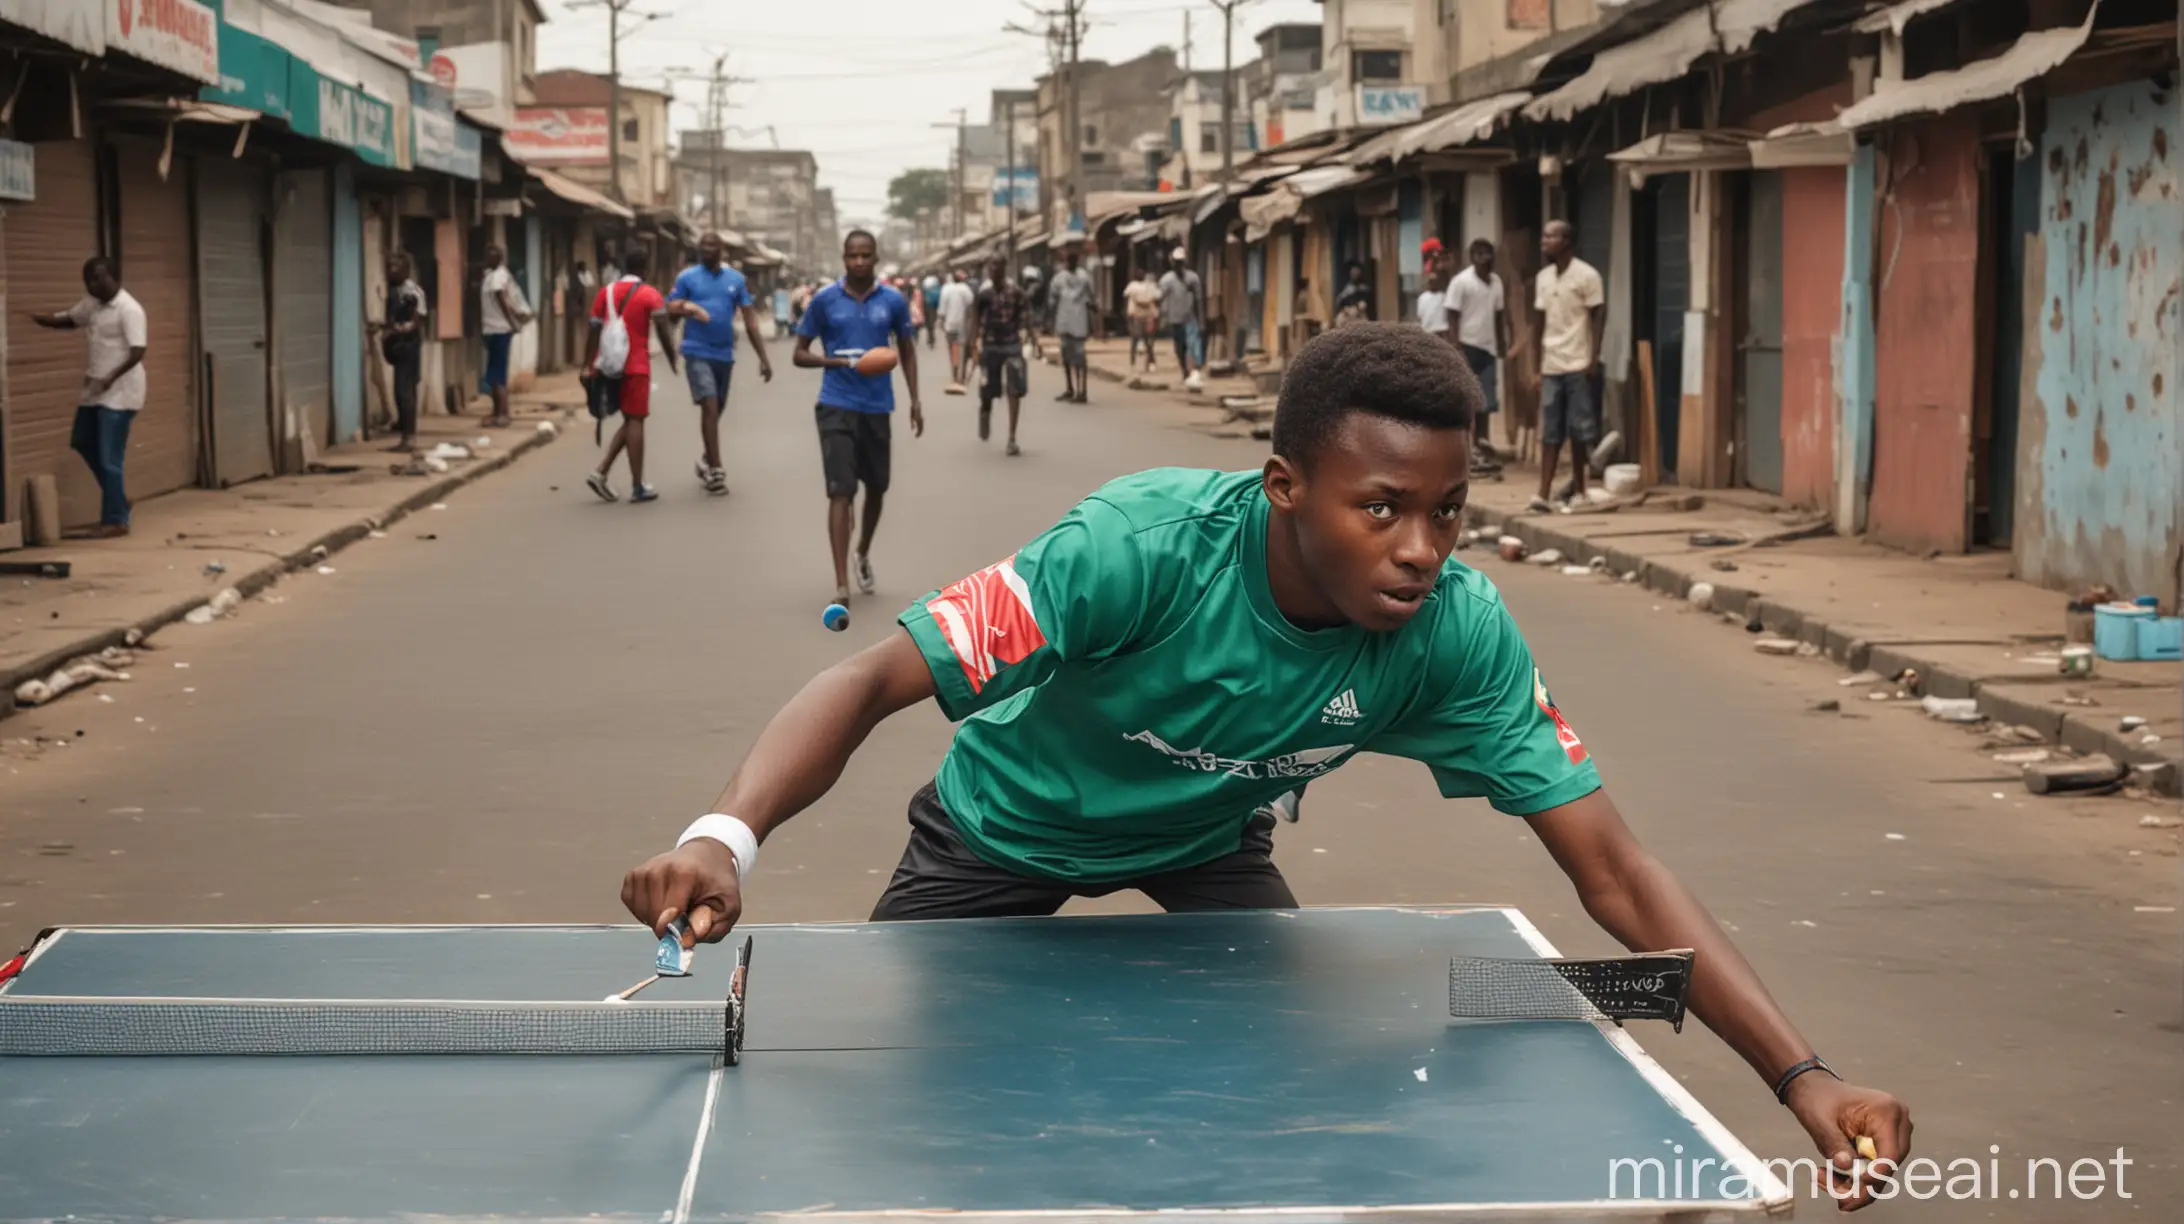 A young Atanda Ganiyu Musa gripping a table tennis racket, determination evident in his eyes, as he practices his backhand stroke on a makeshift table in a bustling Lagos street.